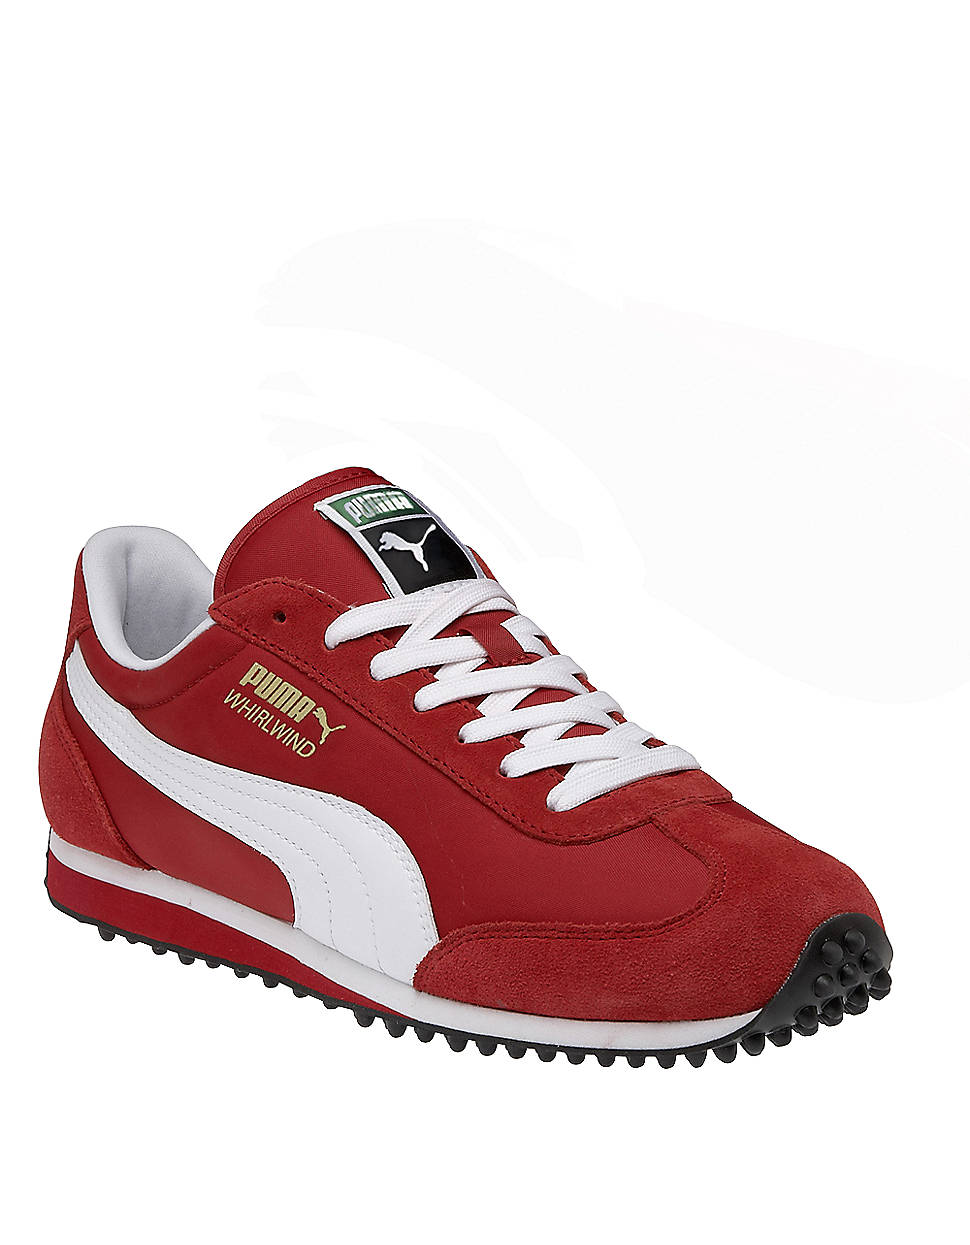 Lyst - Puma Whirlwind Classic Sneakers in Red for Men